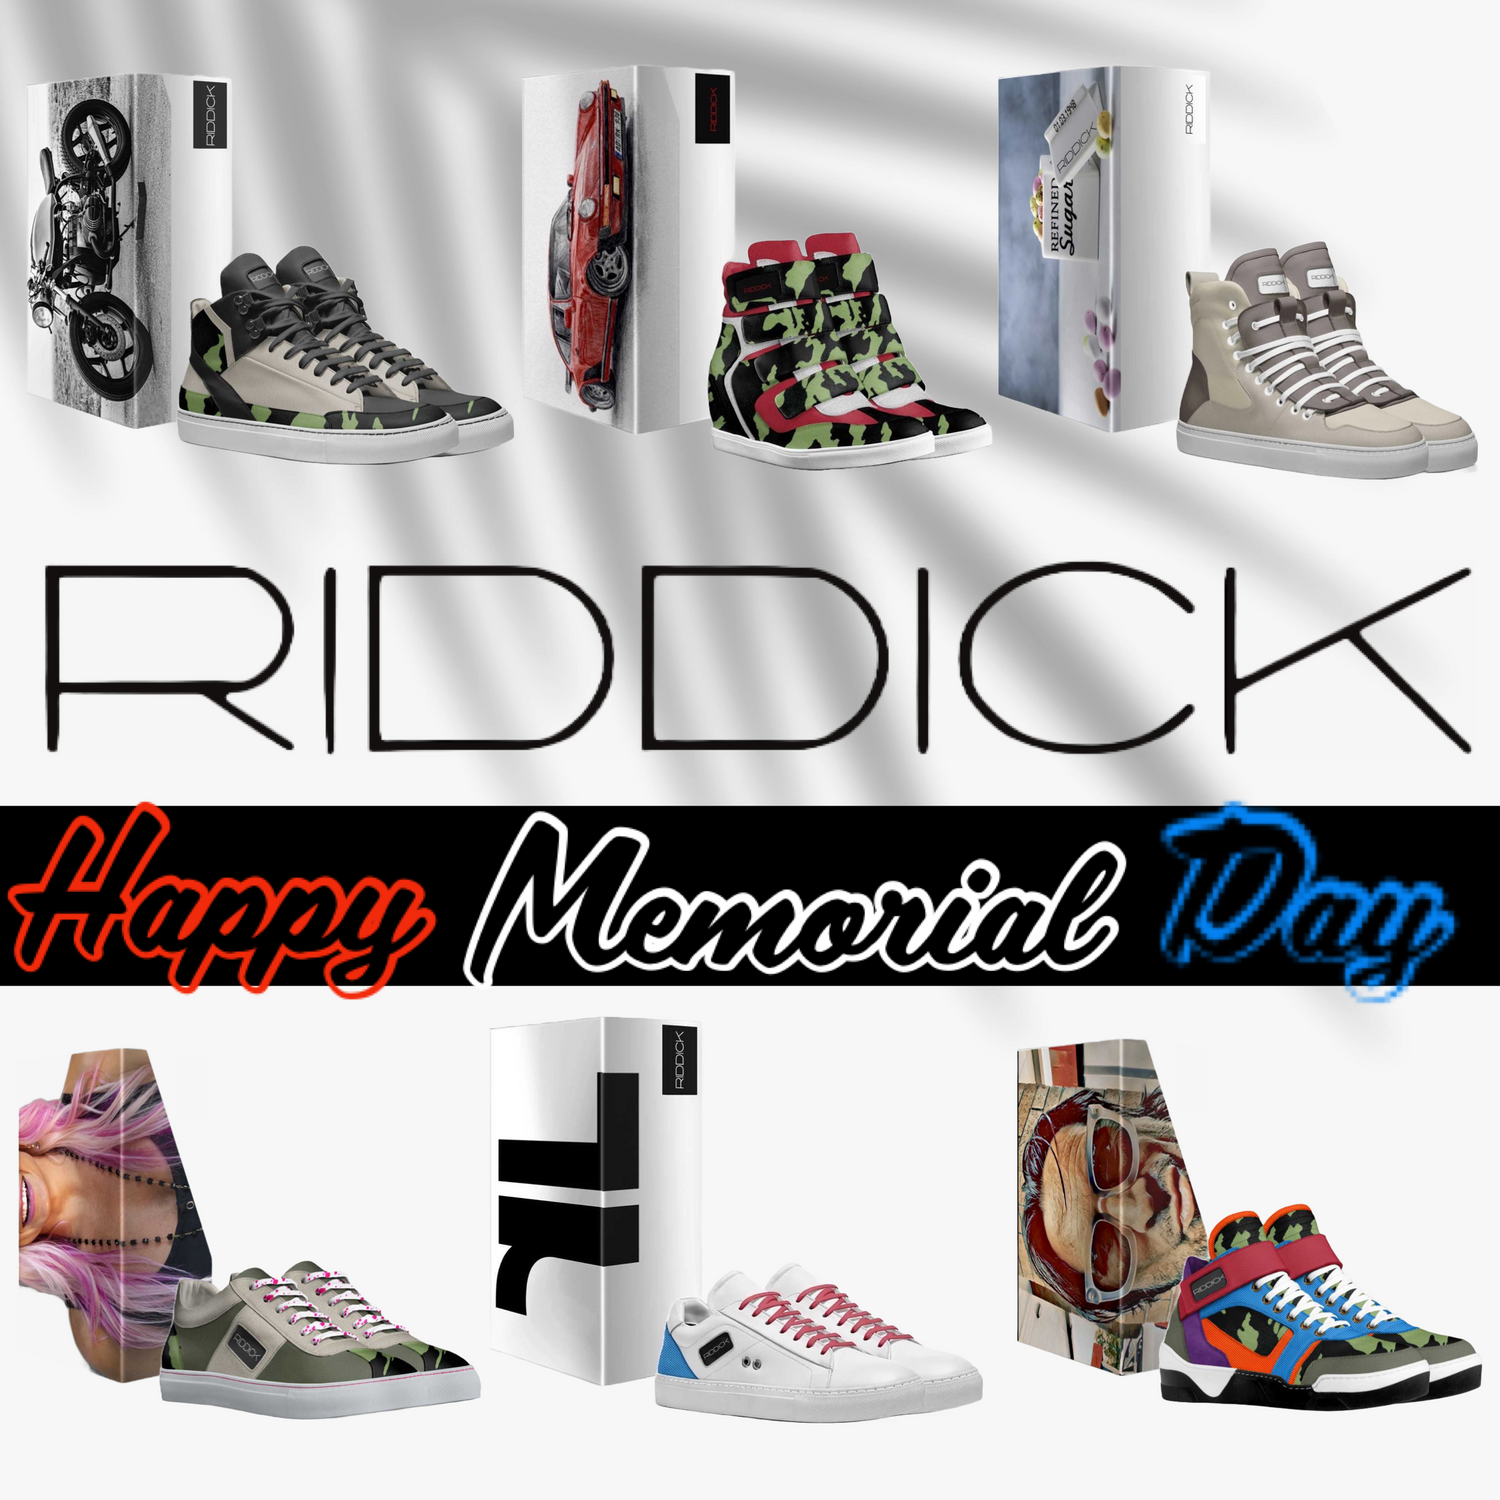 Reflecting on Memorial Day: Commemorate the Heroes with RIDDICK Shoes